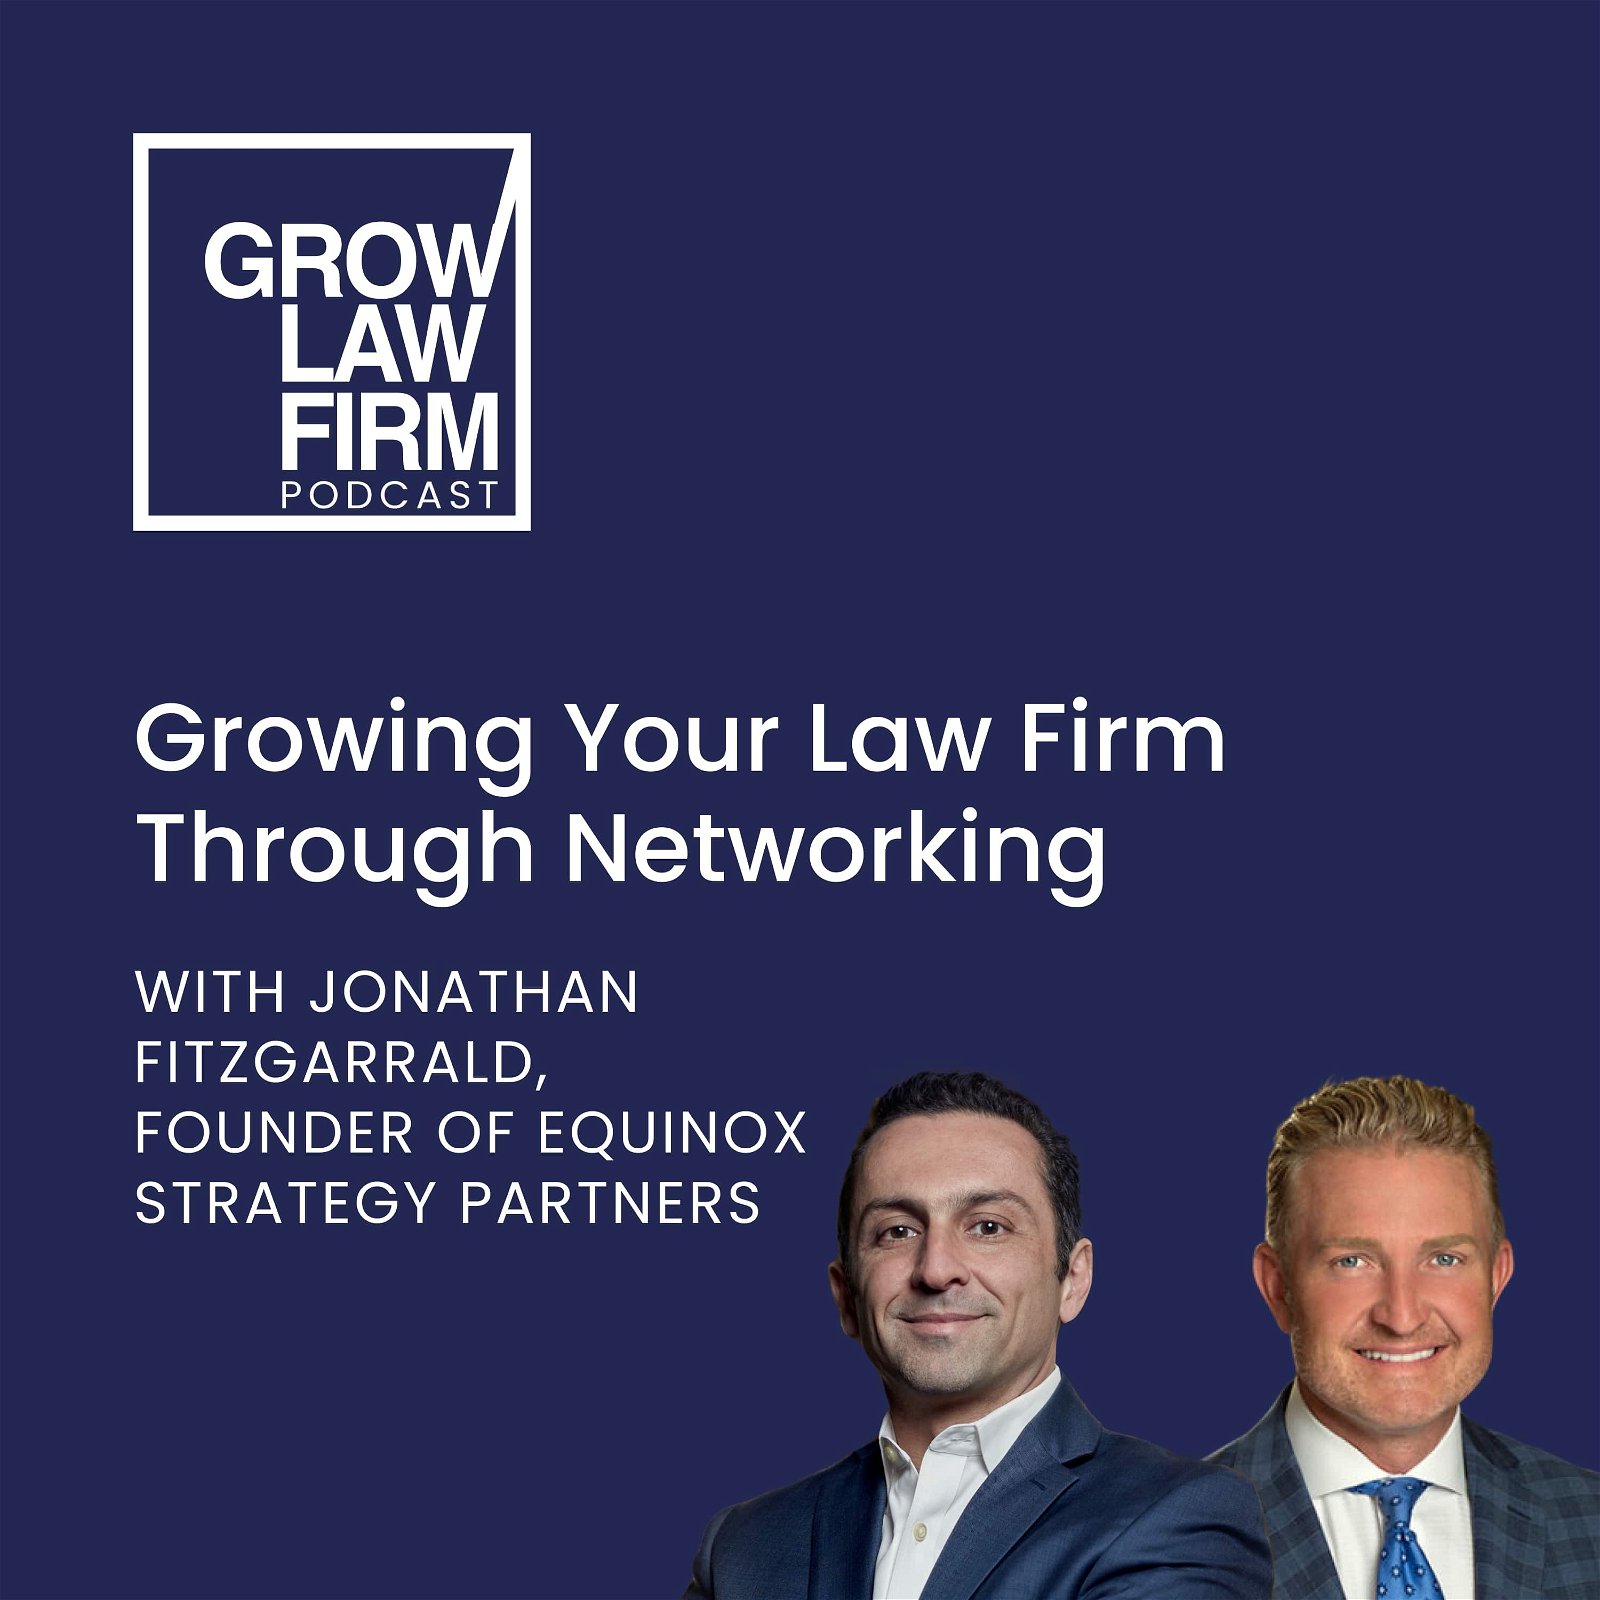 Growing Your Law Firm Through Networking with Jonathan Fitzgarrald, Founder of Equinox Strategy Partners